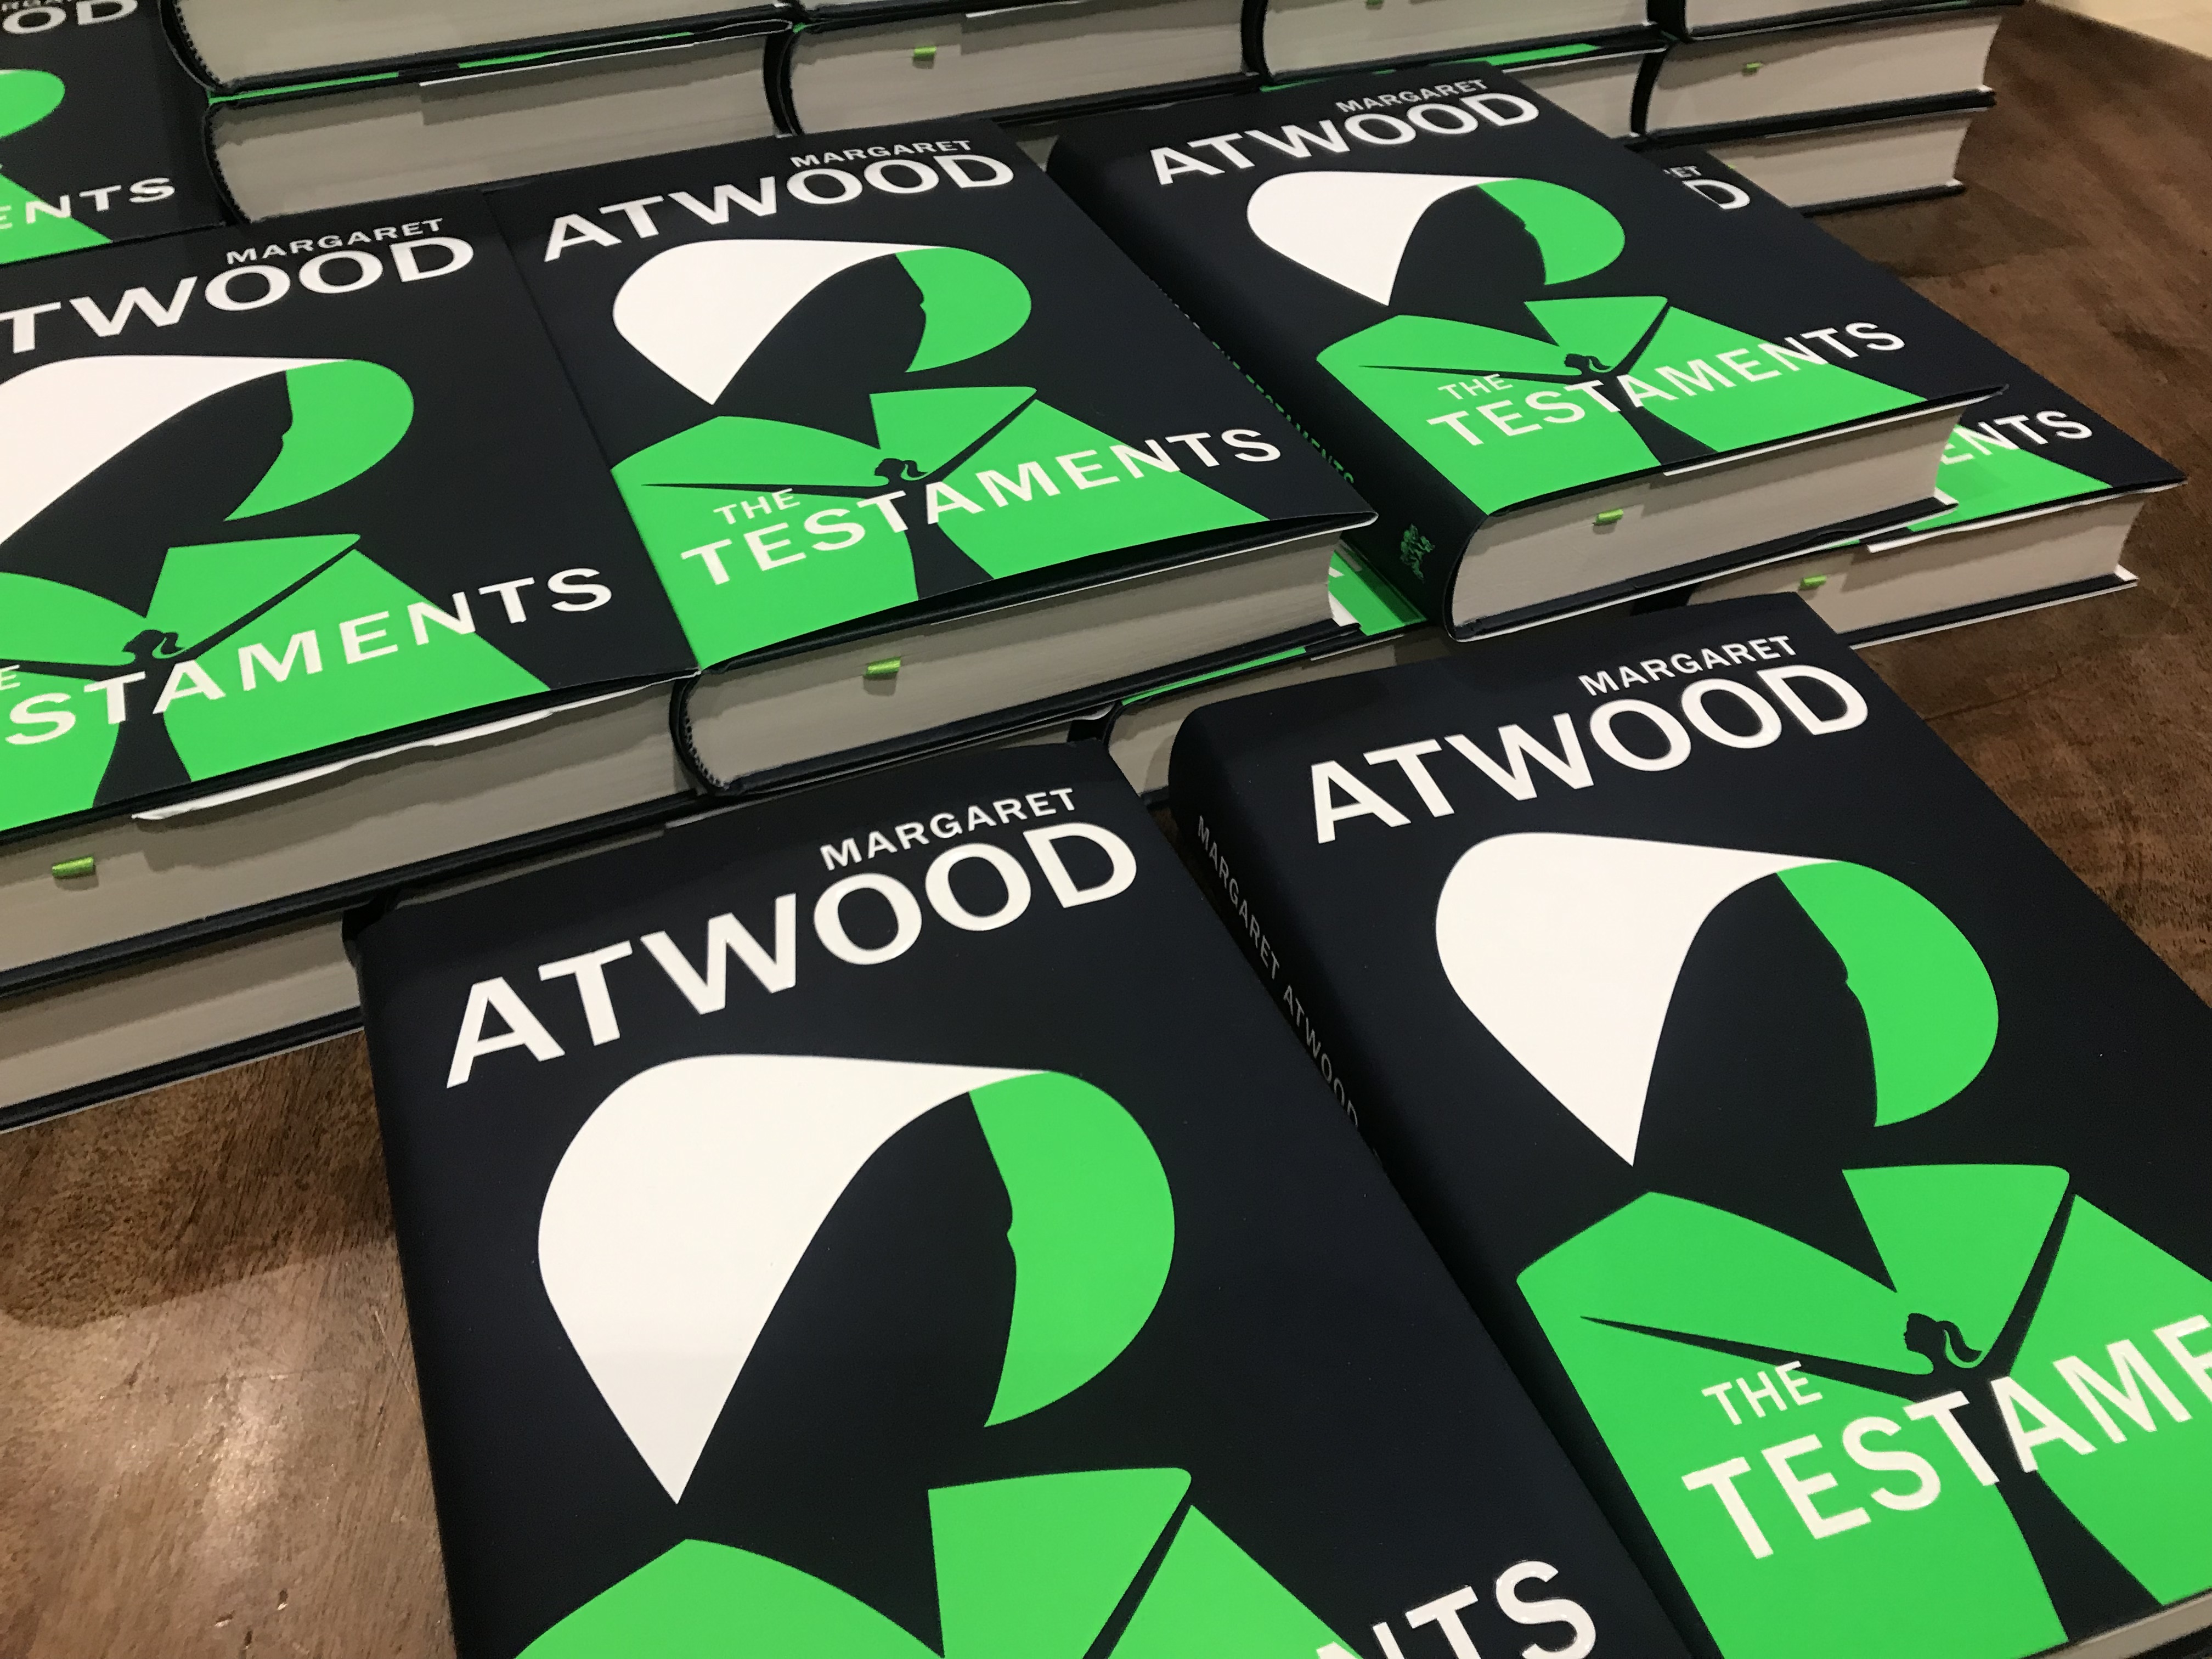 Margaret Atwood's new book, The Testaments, on display